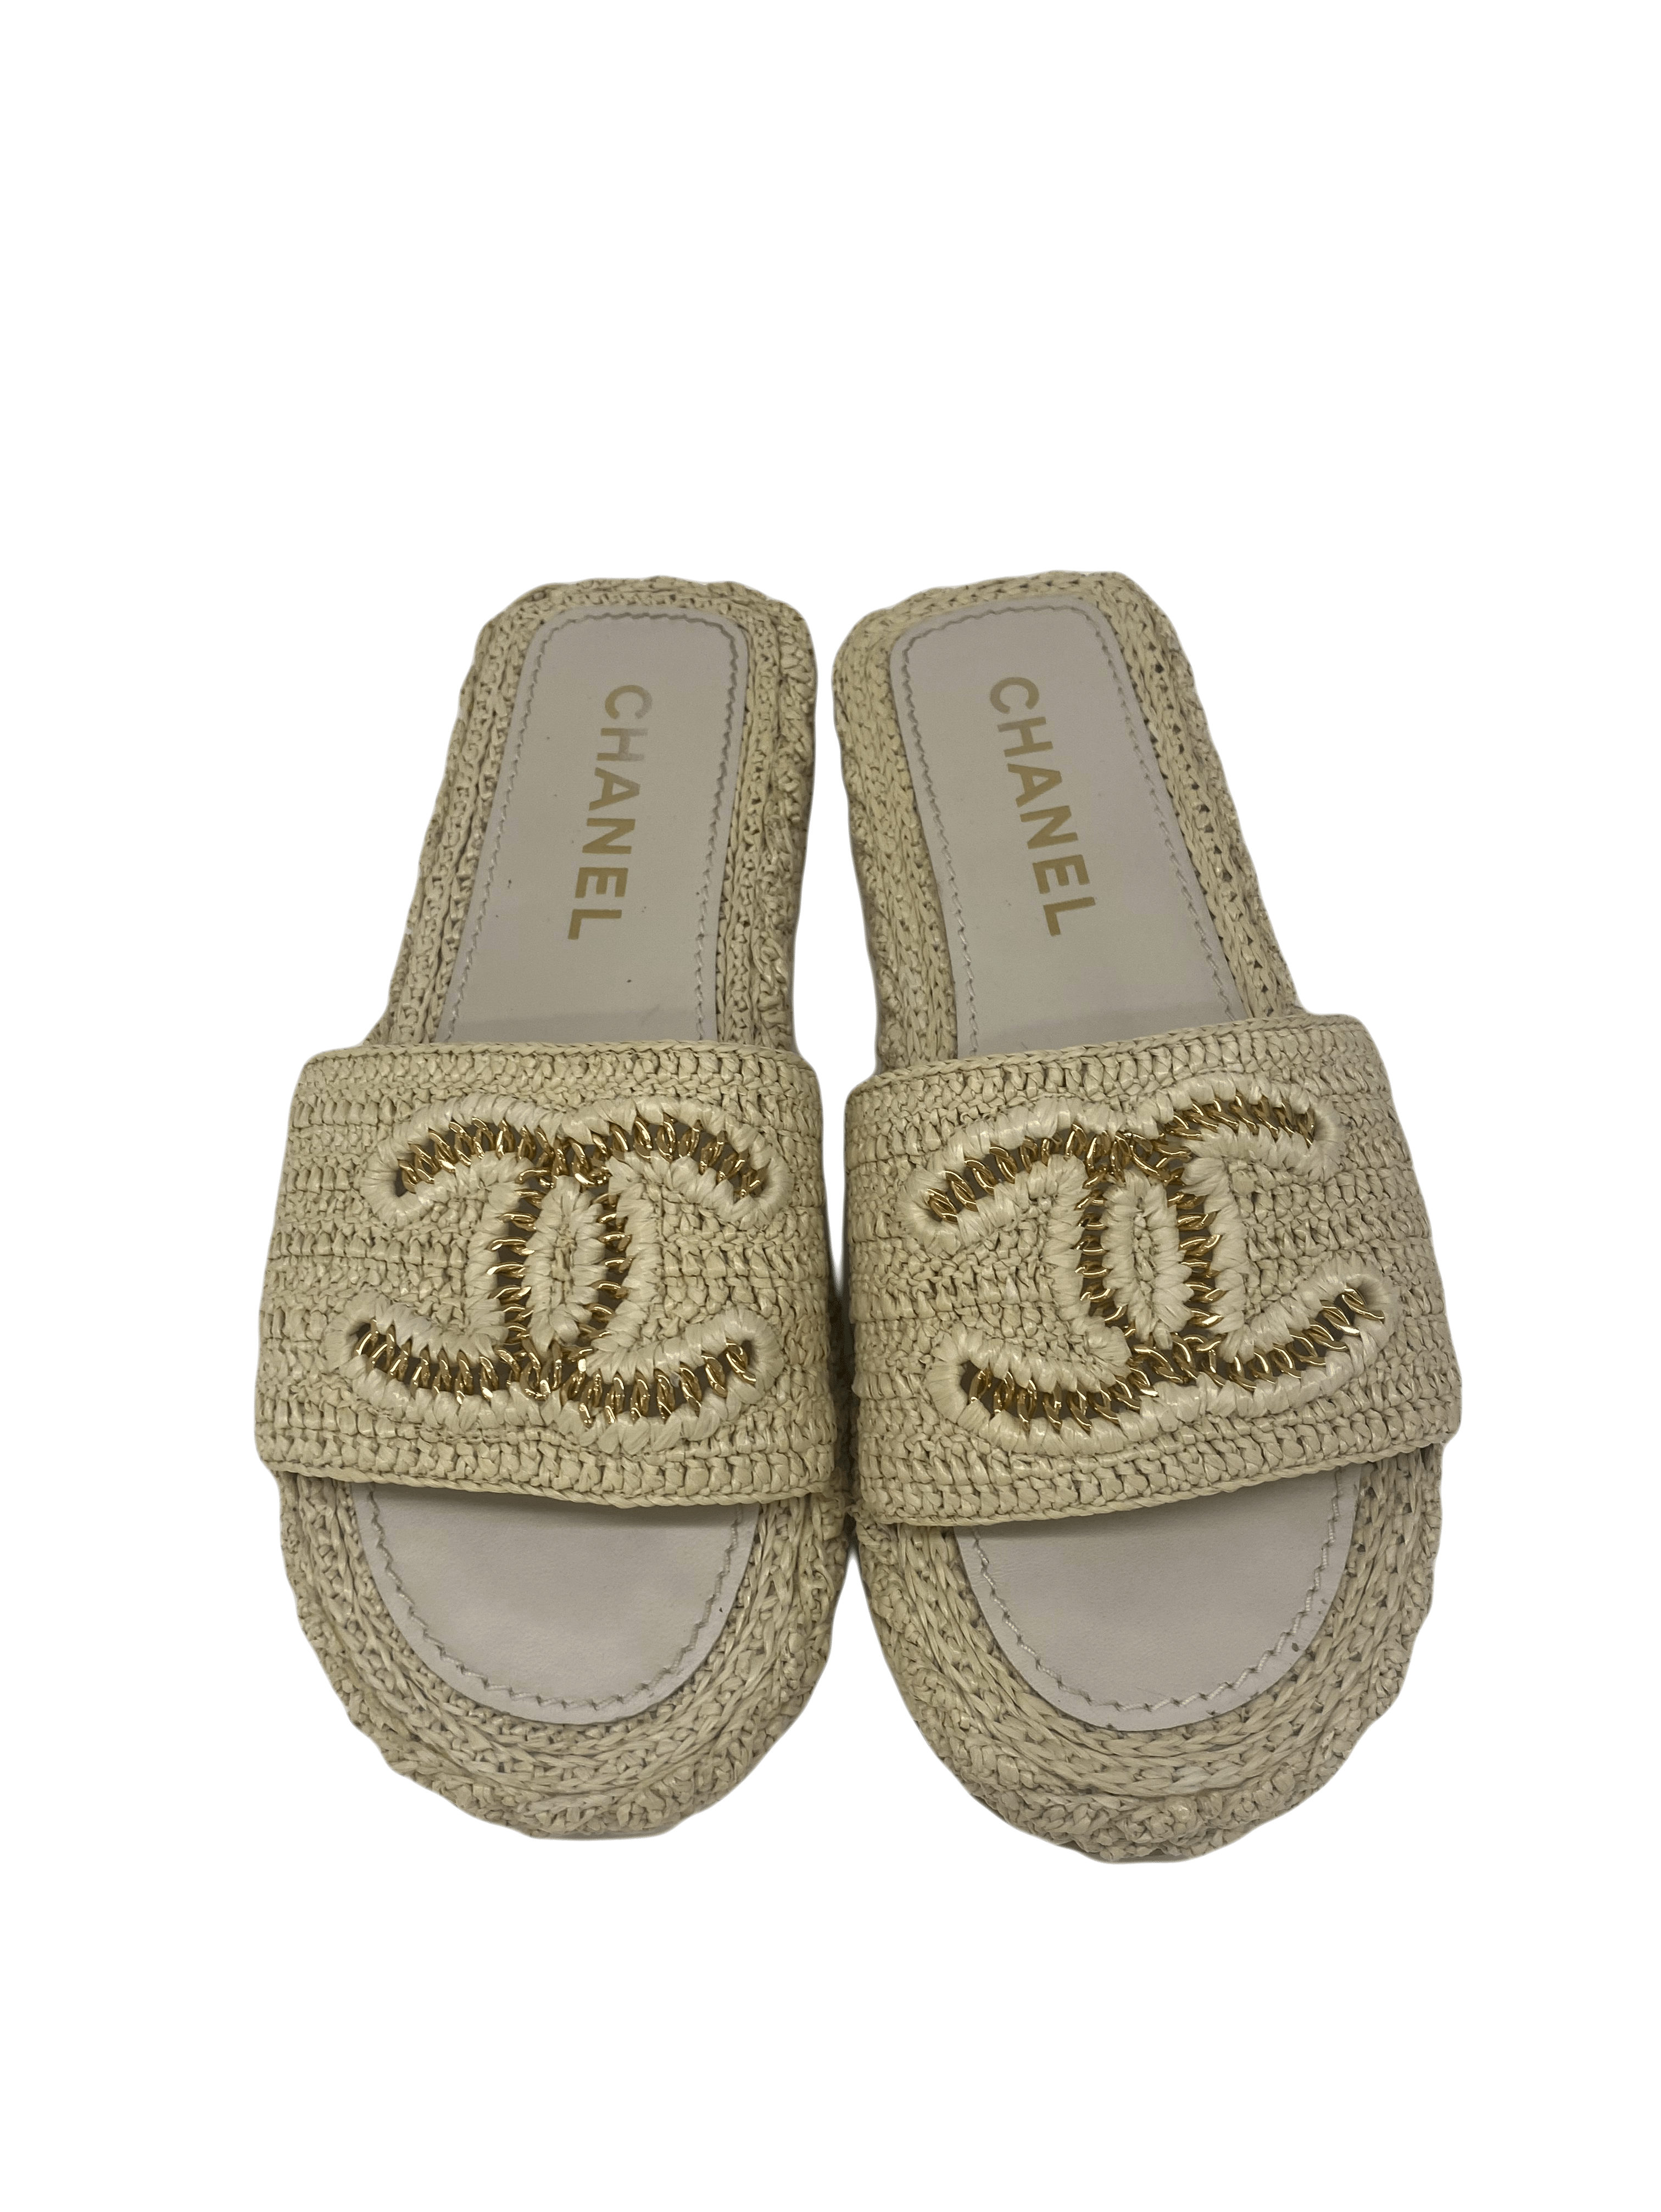 Chanel Beige Woven and Chain Slides - Size 41